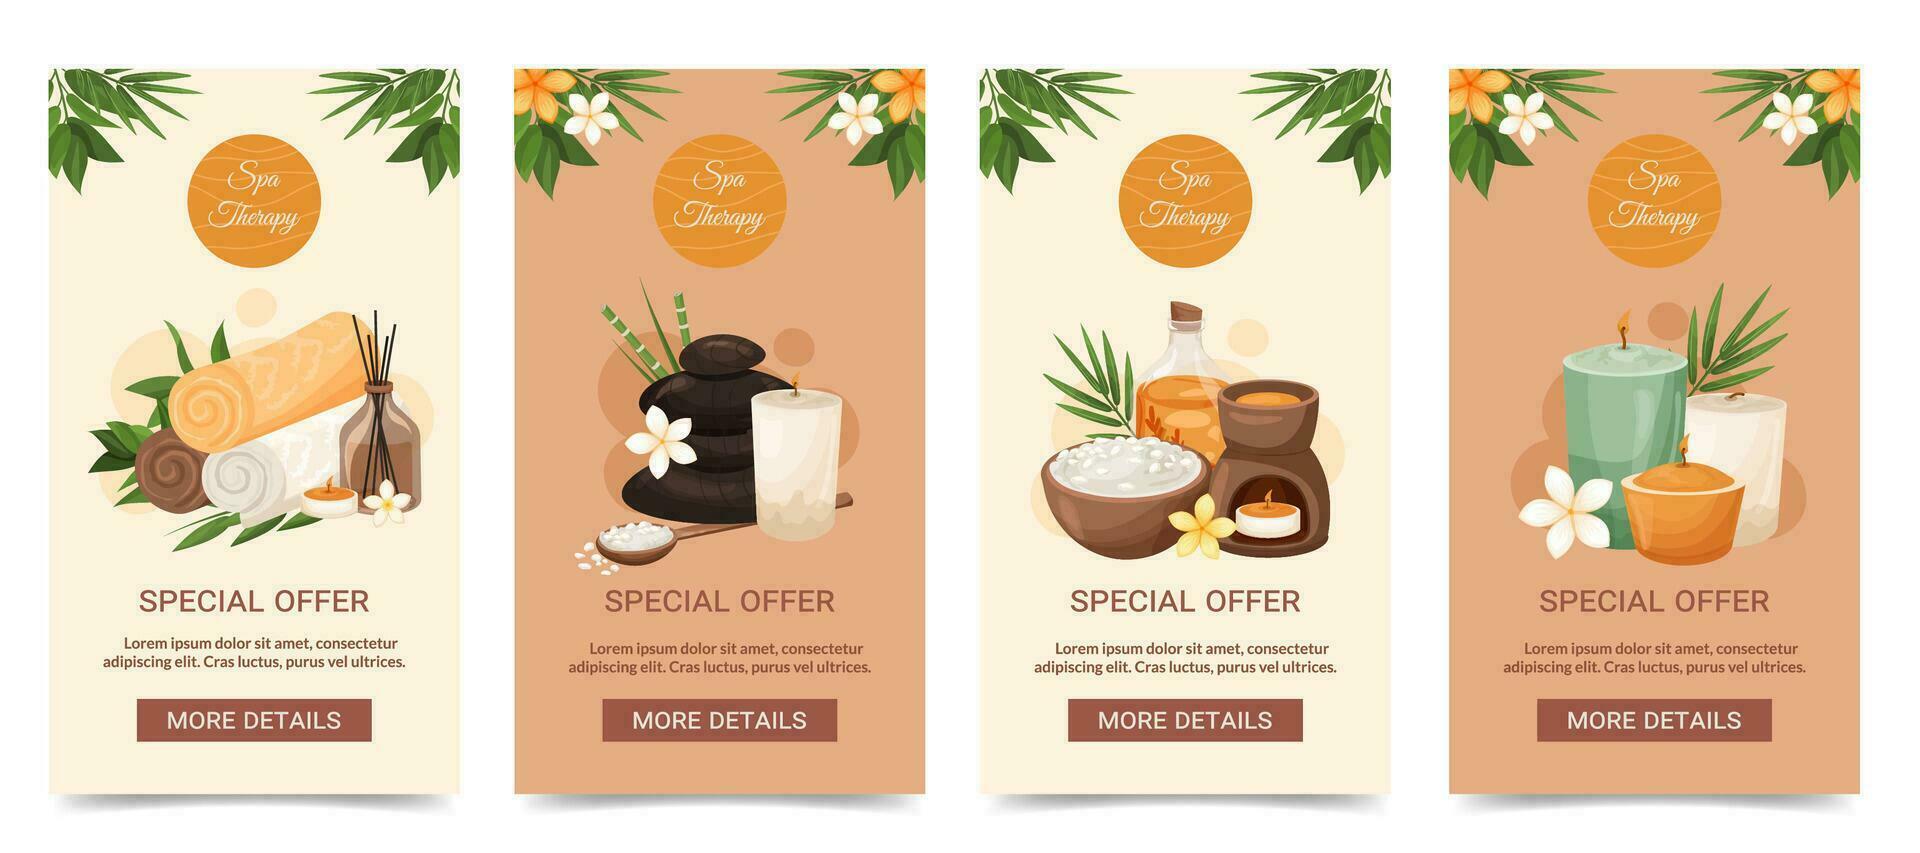 Social media story and front page cover templates spa collection. Special offer design with exotic flowers, bamboo leaves, cosmetics, aromatherapy. Promotional spa salon branding vector Illustration